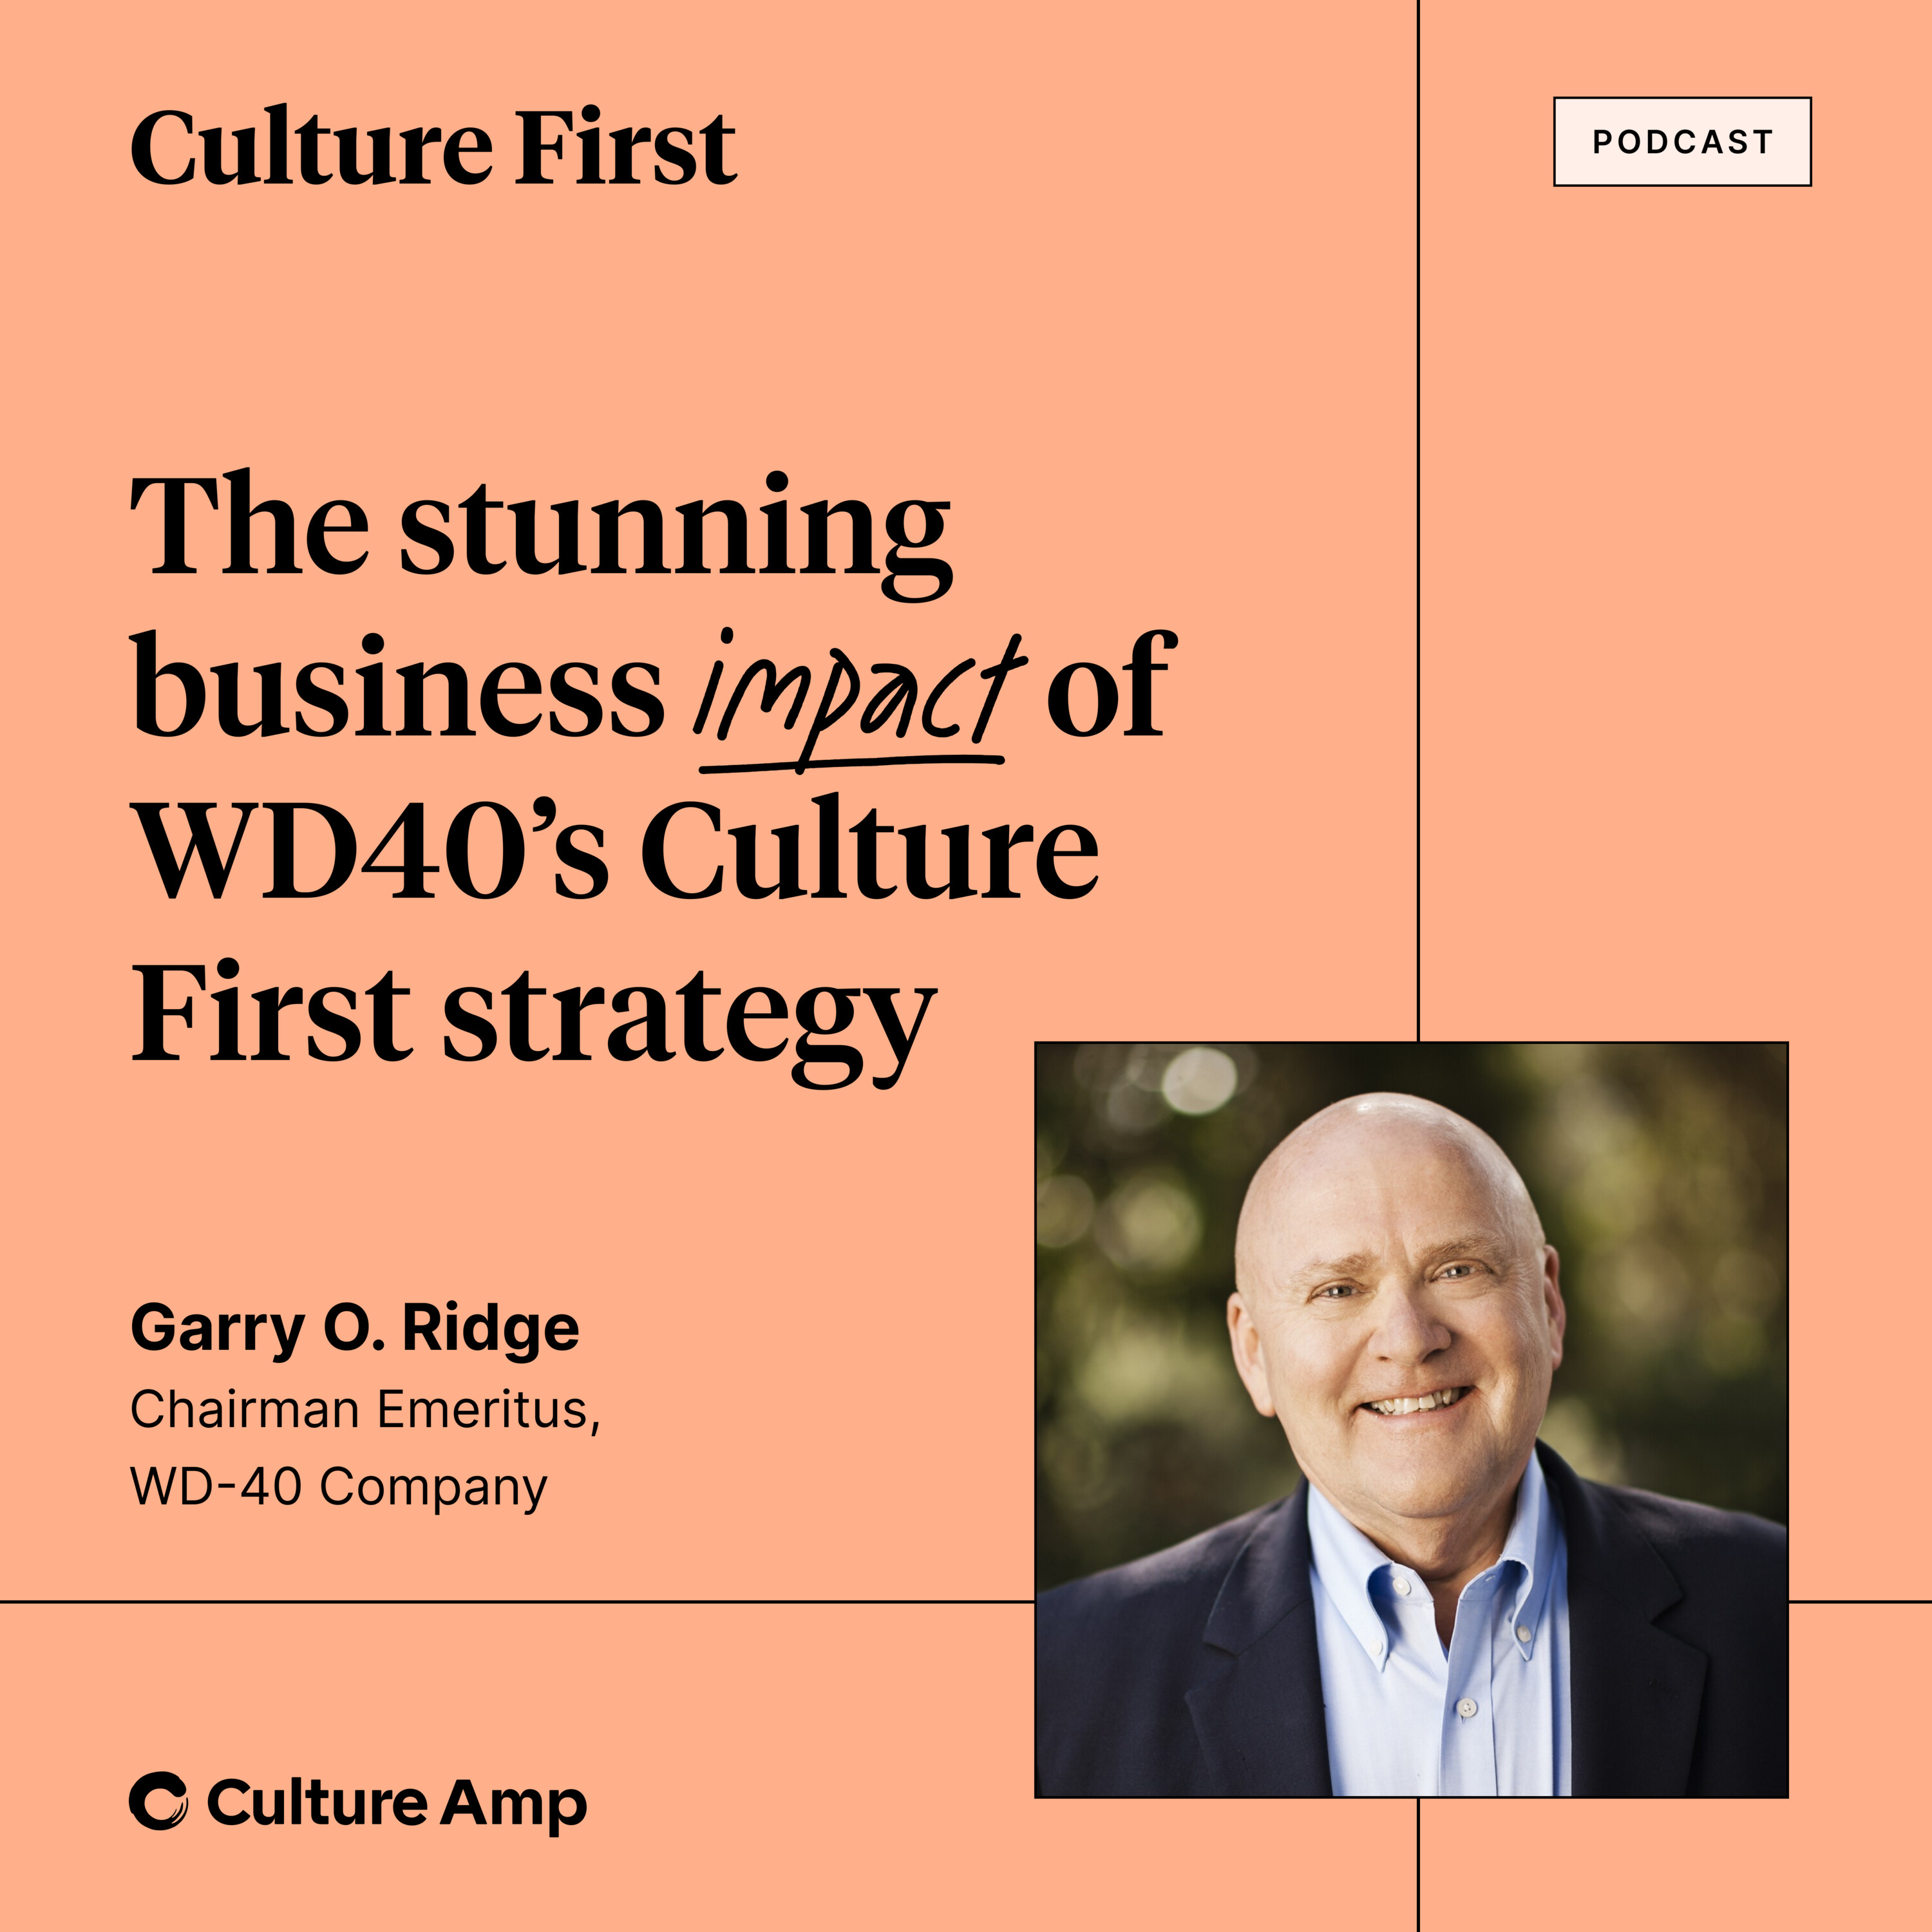 Garry Ridge: The stunning business impact of WD40’s Culture First strategy